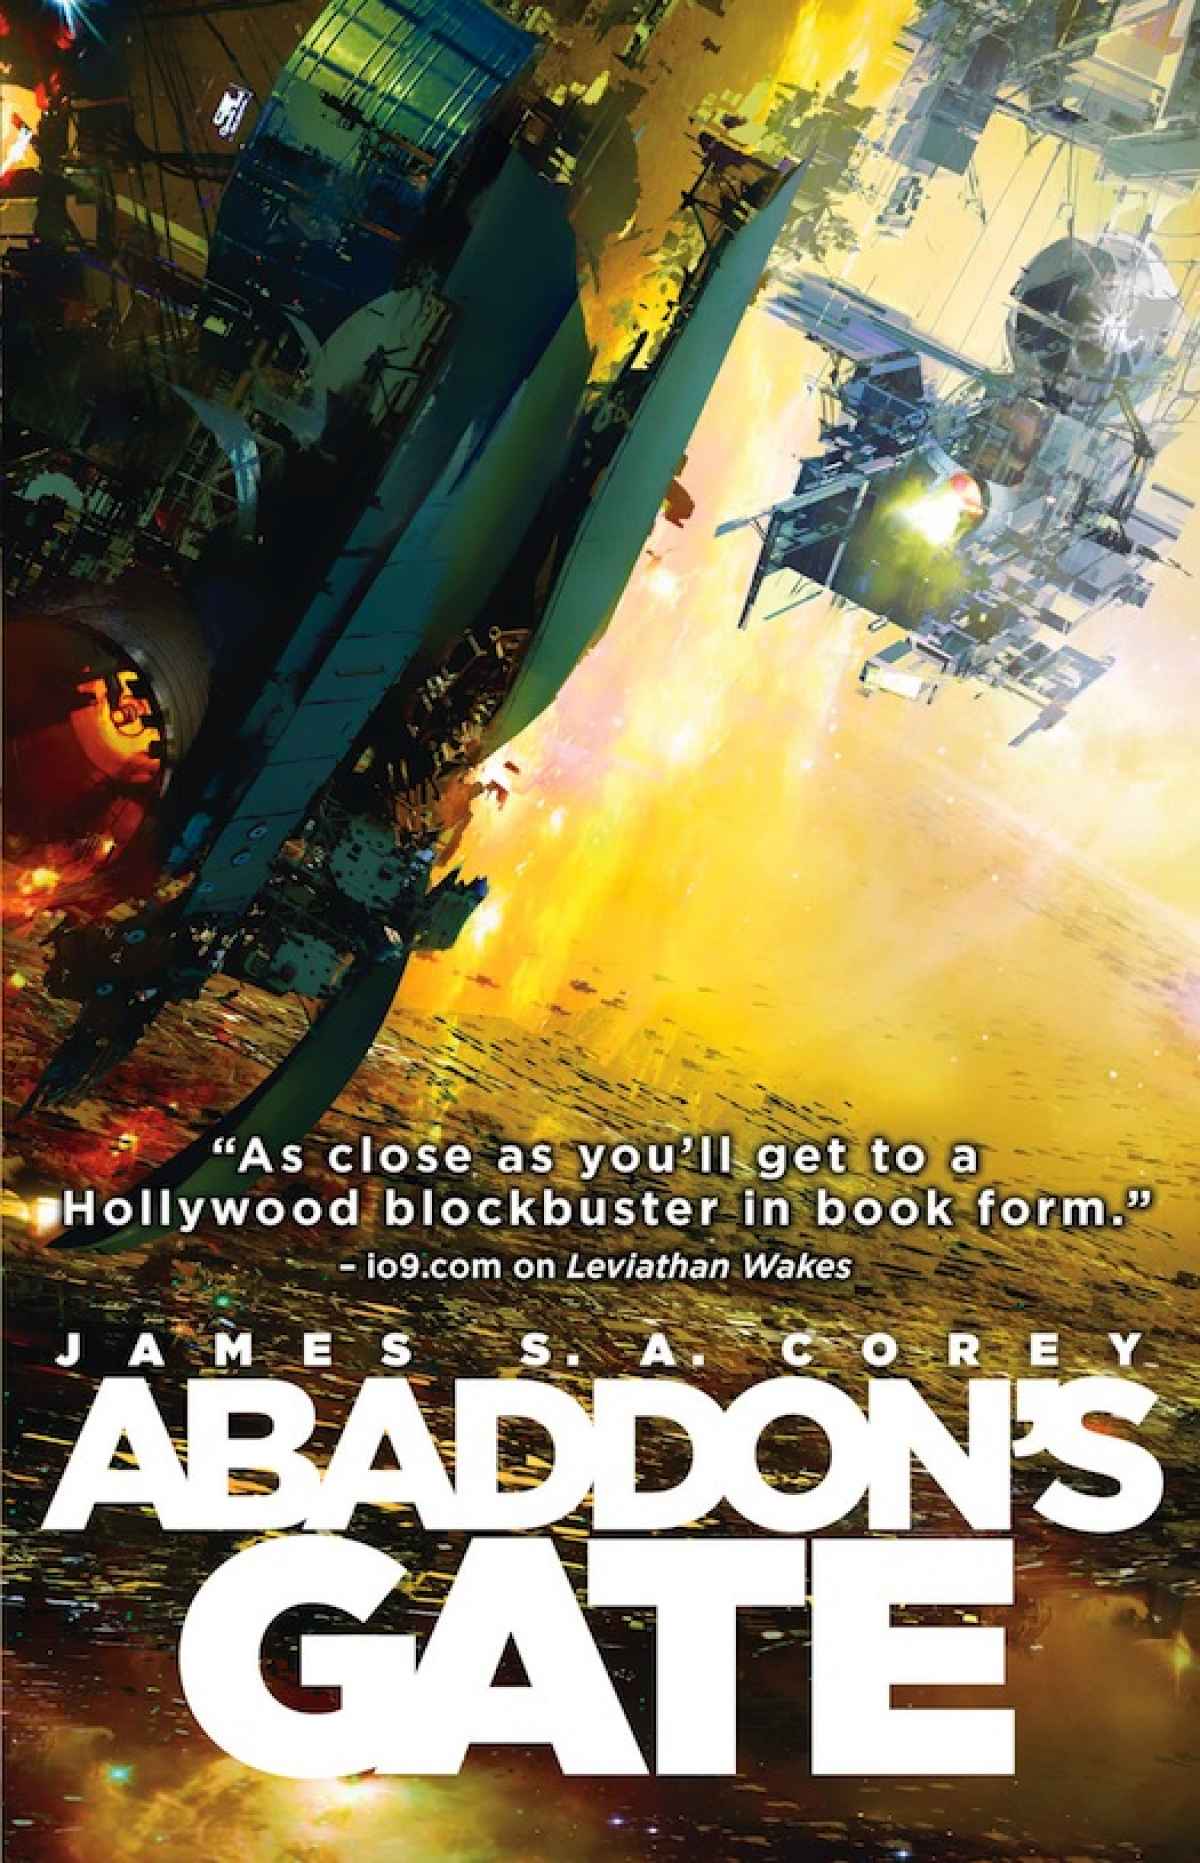 Friday Reads: Abaddon’s Gate by James S.A. Corey